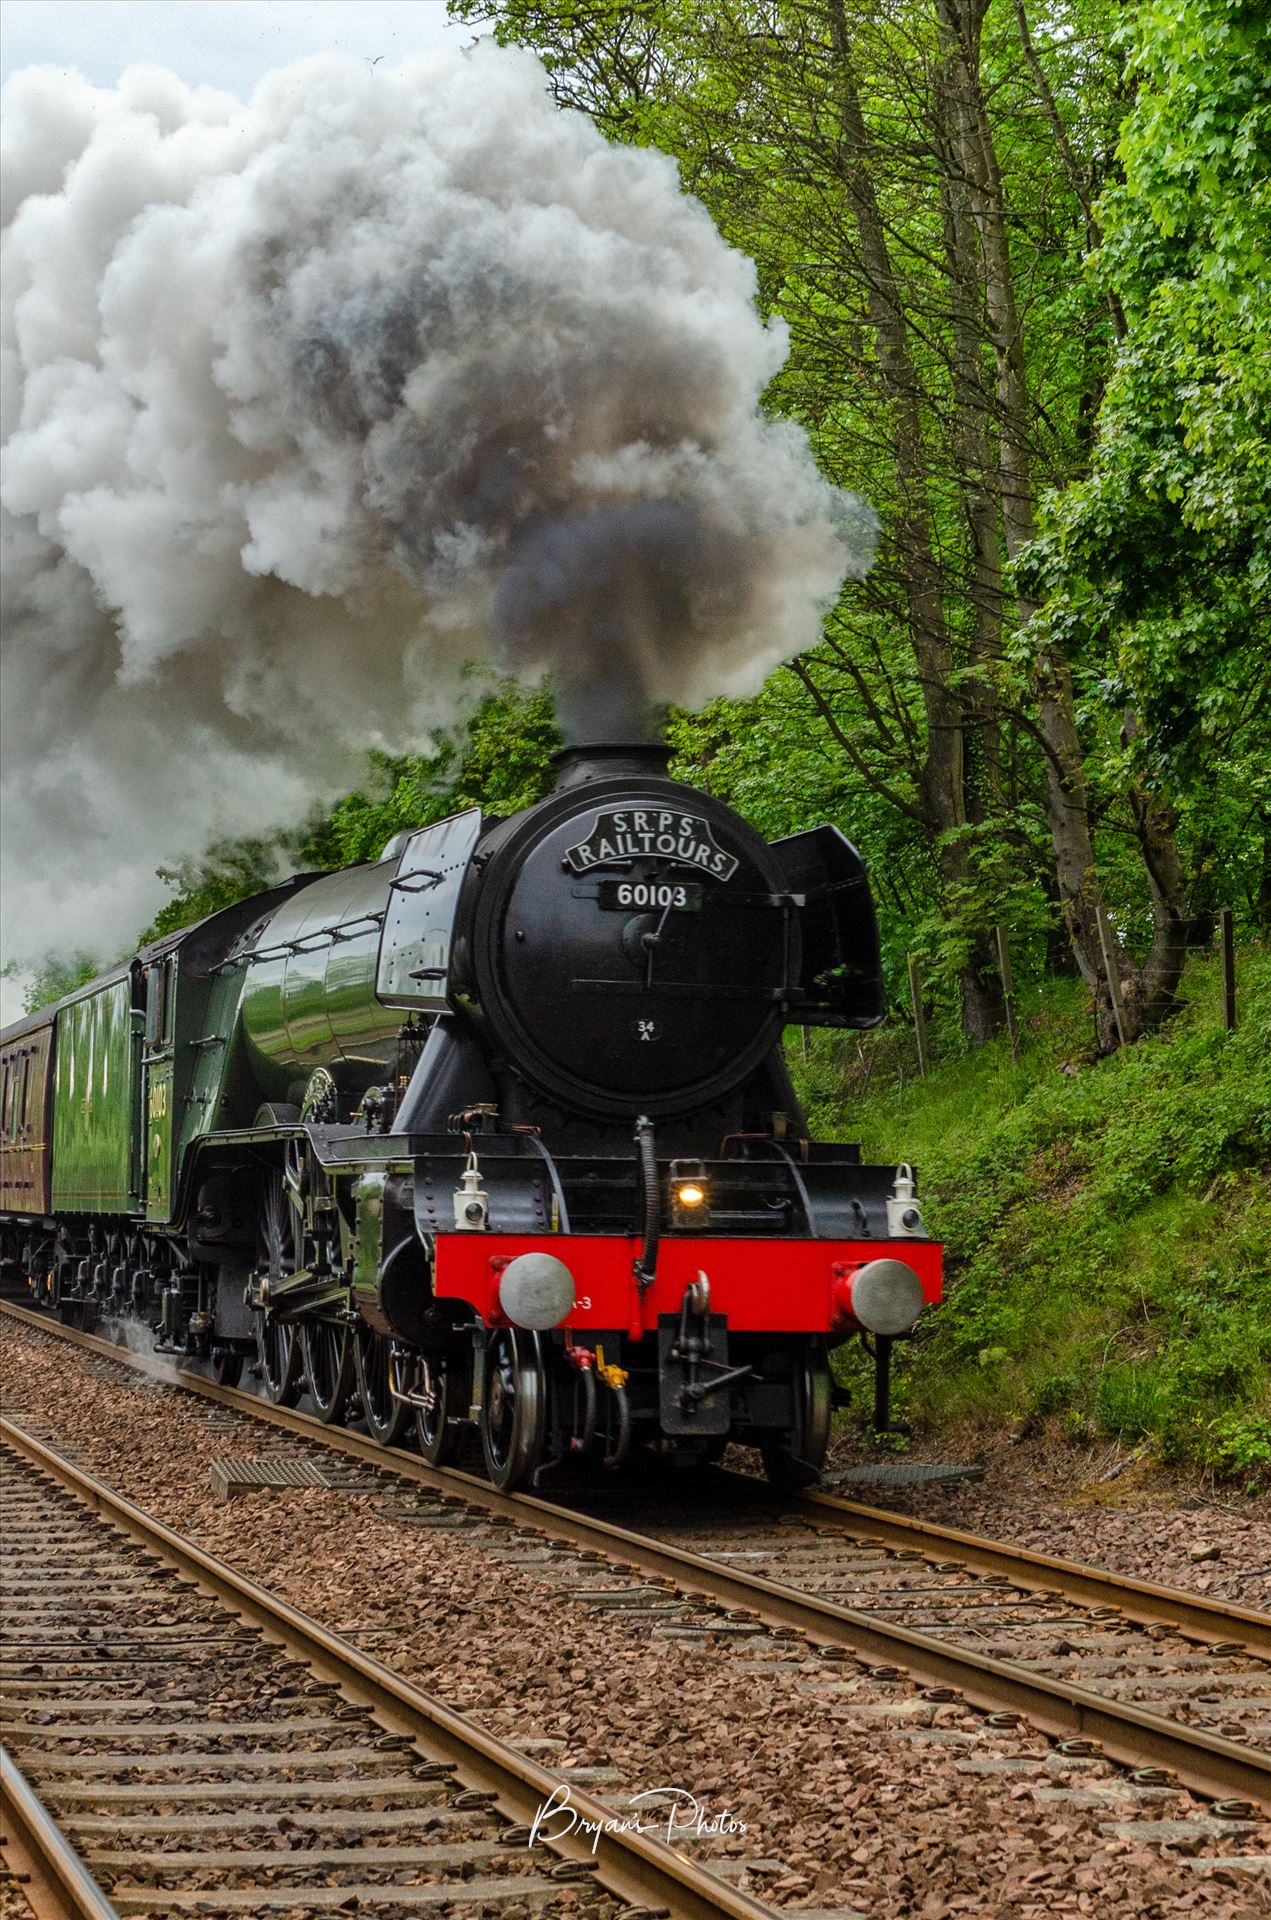 Flying Scotsman Portrait A portrait photograph of the Flying Scotsman taken as it approaches Dalgety Bay during a trip round the Fife circle. by Bryans Photos